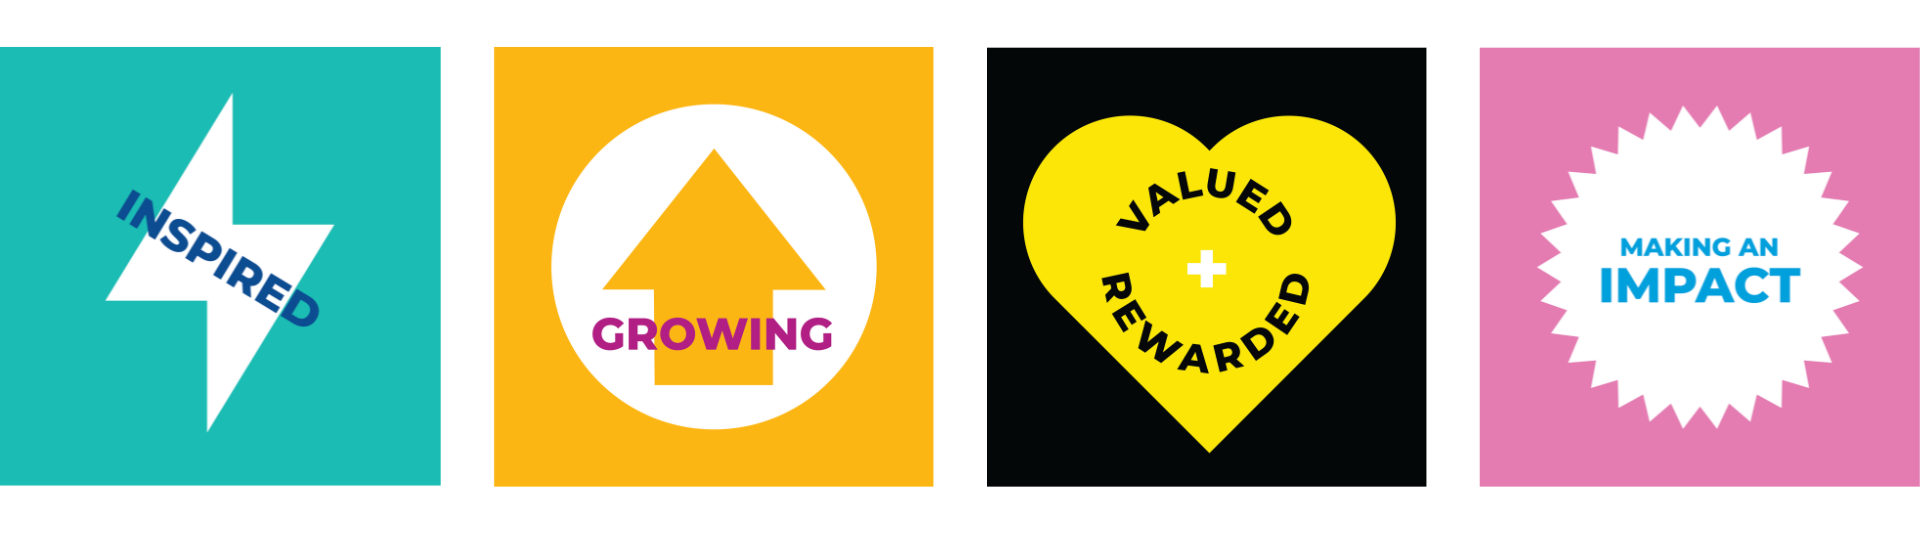 A row of four logos of Procter & Gamble's employee evaluation equation. A green logo for Inspired. An orange logo for Growing. A black and yellow logo for Value and Rewarded. A pink logo for Making an Impact.